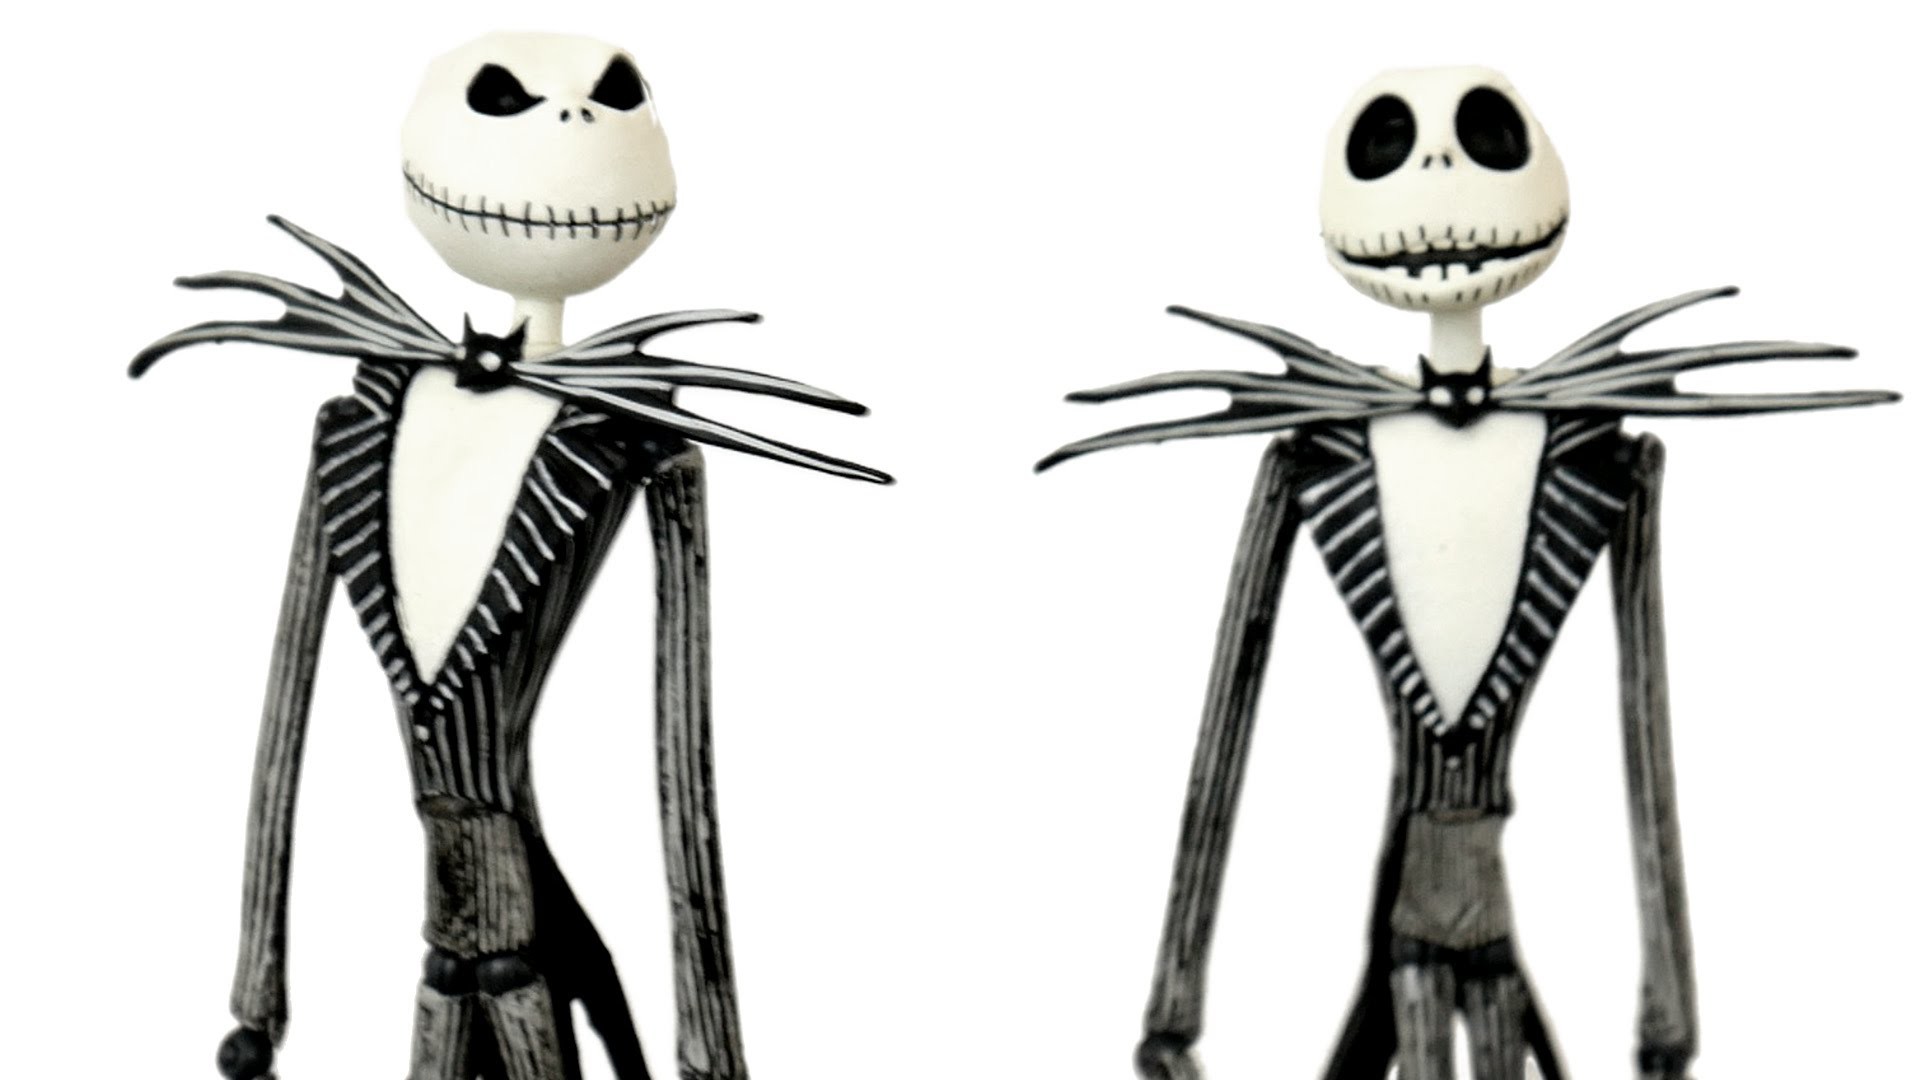 1920x1080 Jack Skellington Nightmare Before Christmas Toys R Us Exclusive Toy  Unboxing, Comparison & Review!! - YouTube